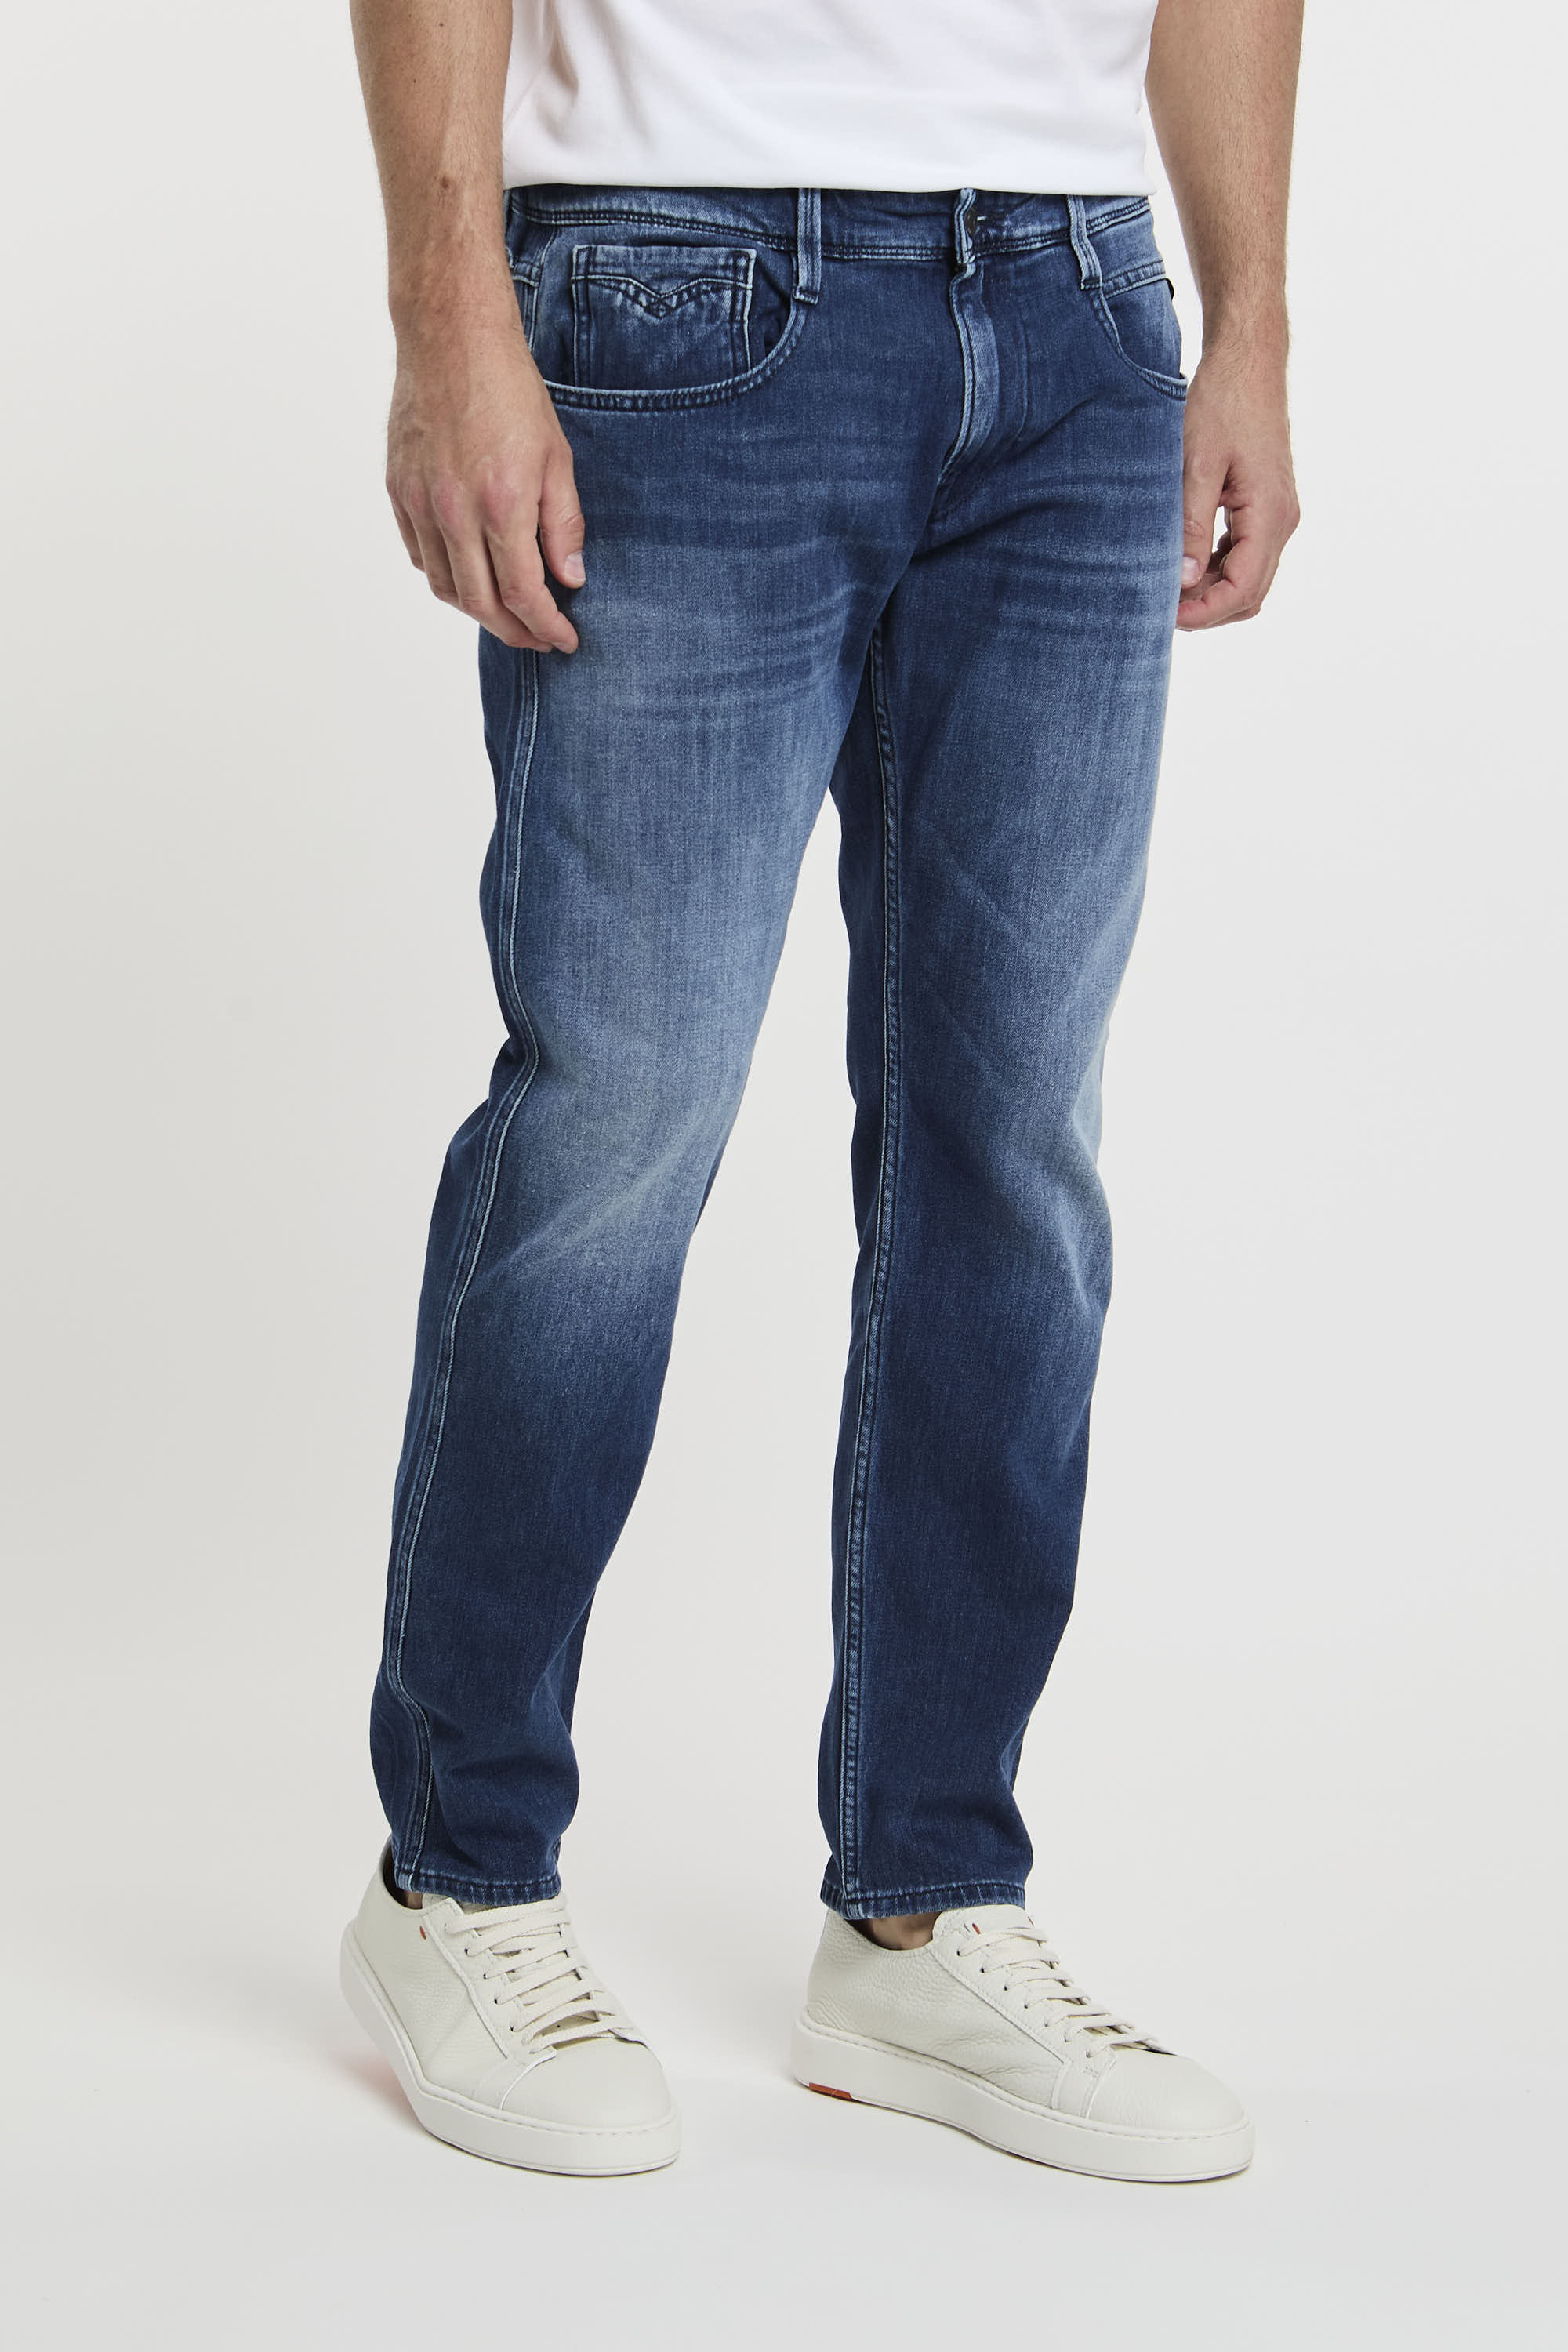 Replay Jeans Slim Fit Anbass Cotton/Polyester Denim-3